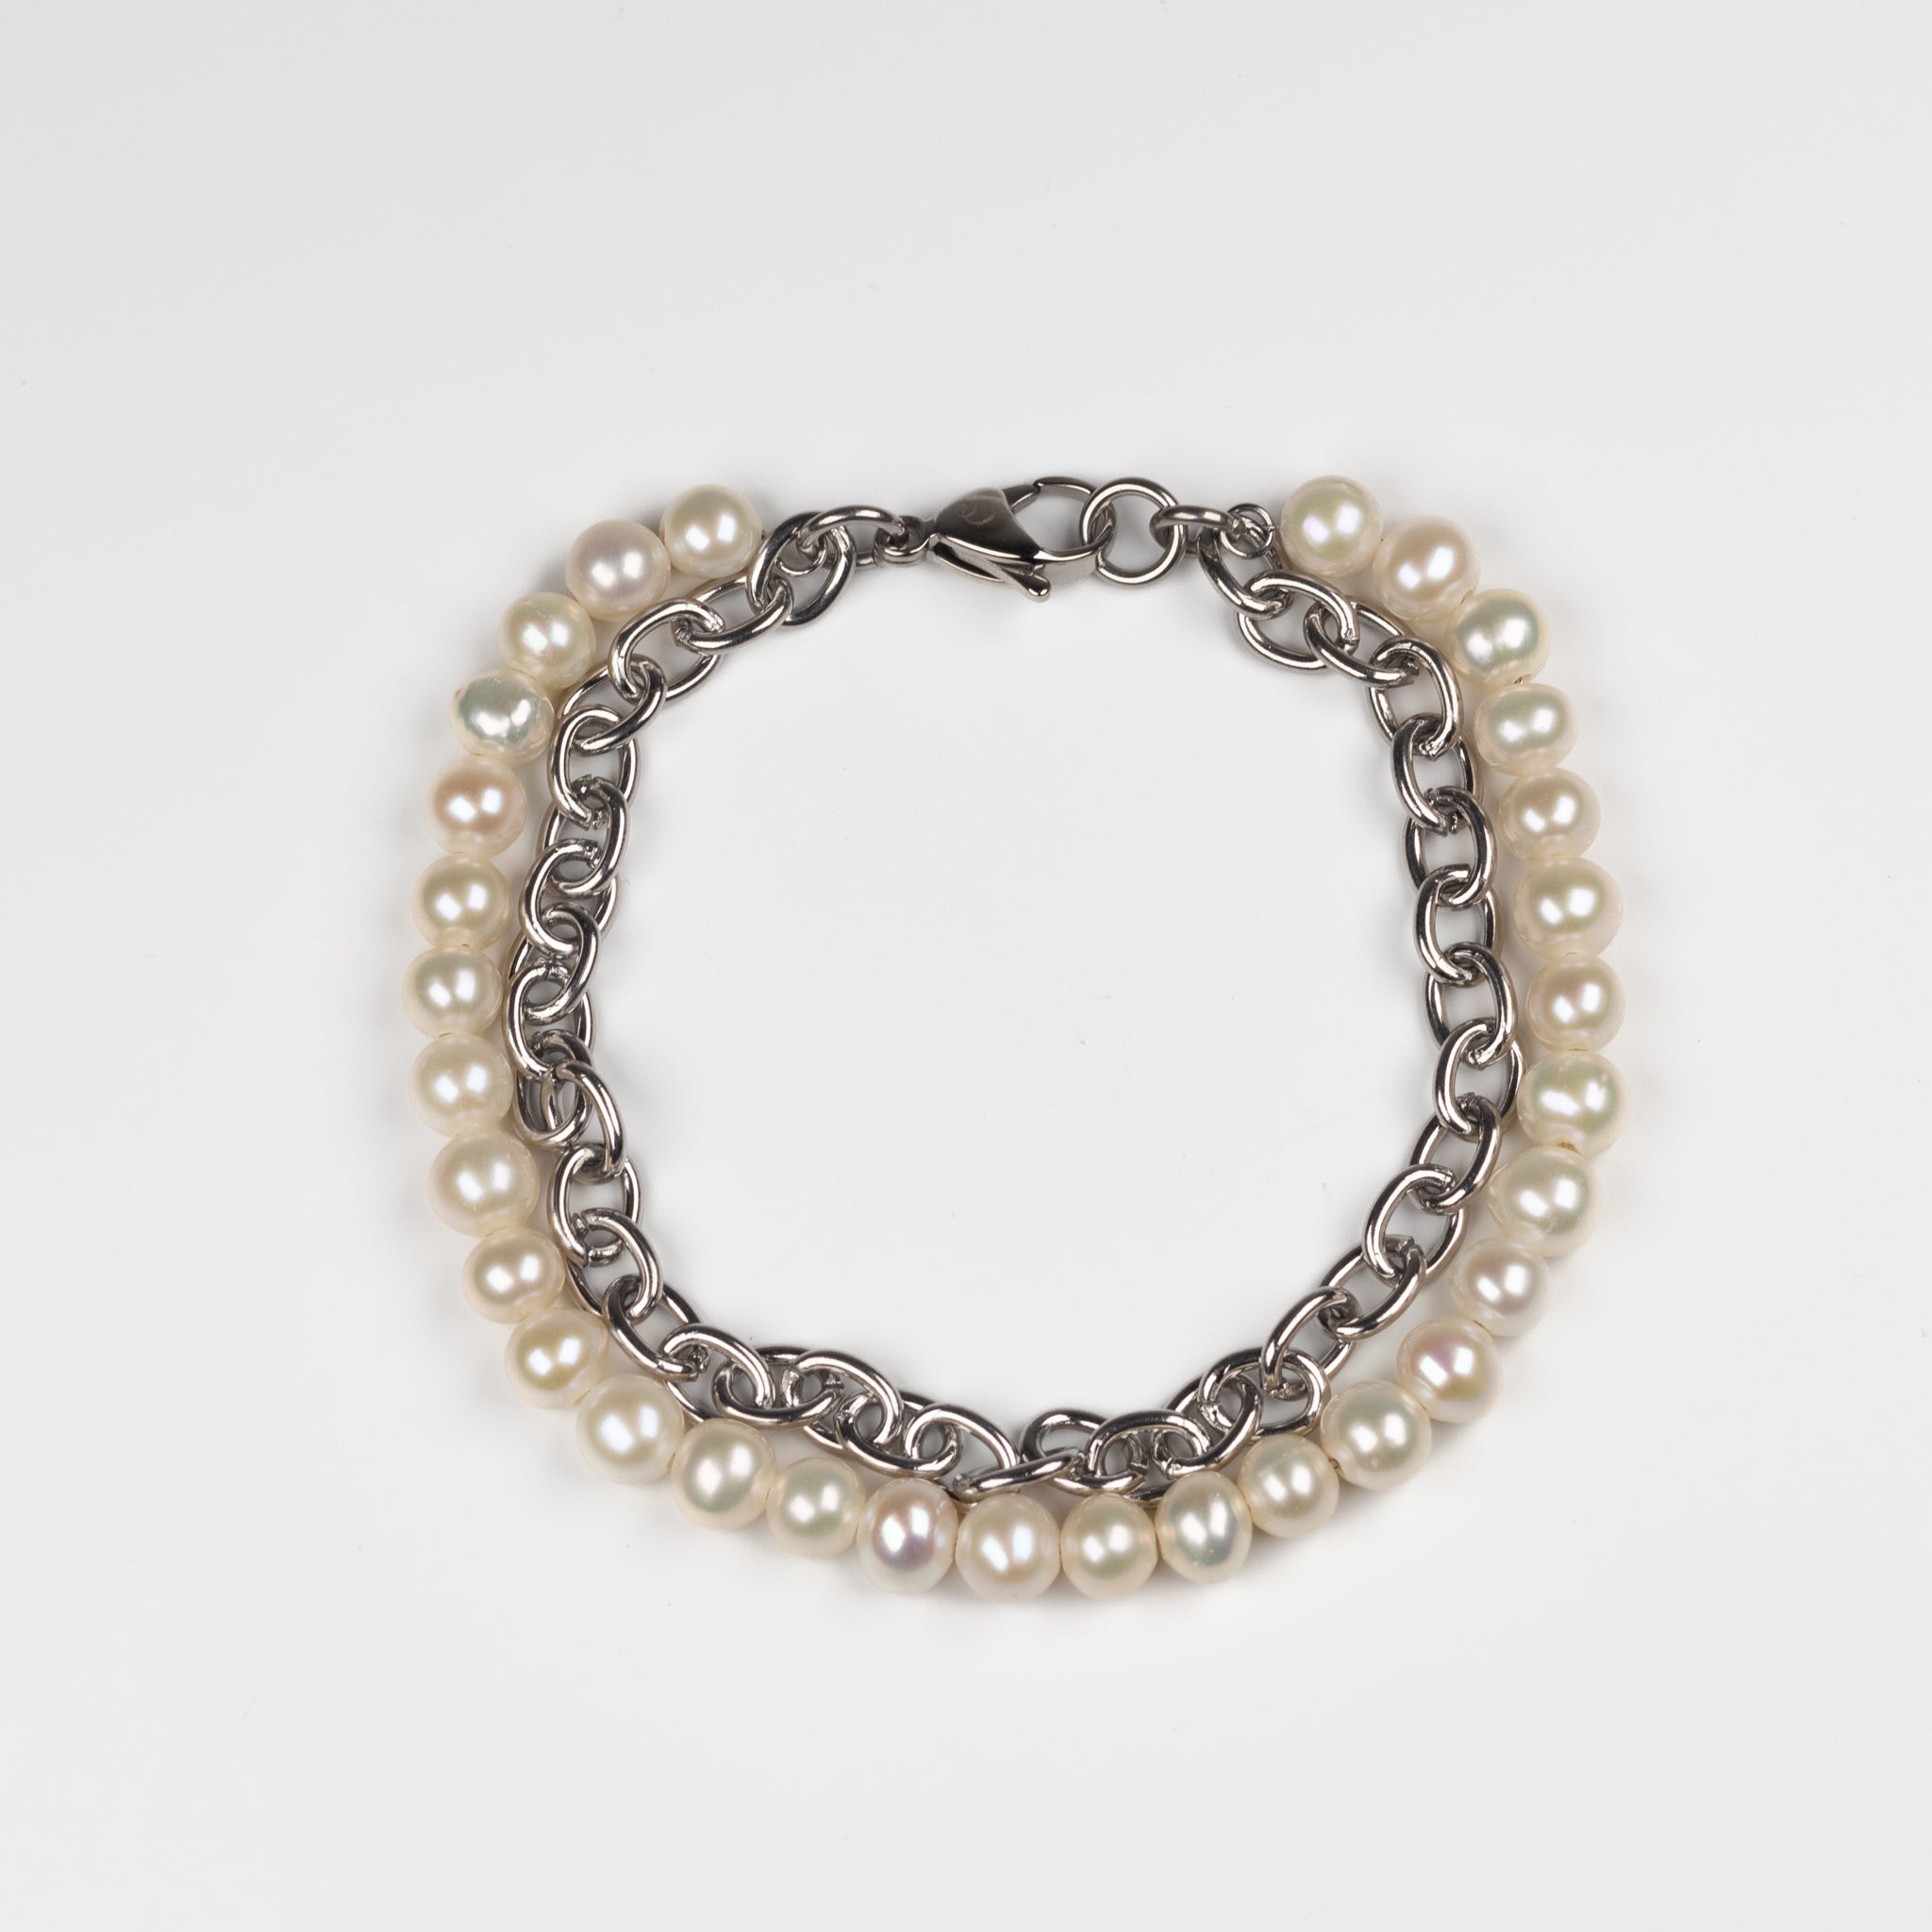 Stainless Steel and White Freshwater Pearl Bracelet